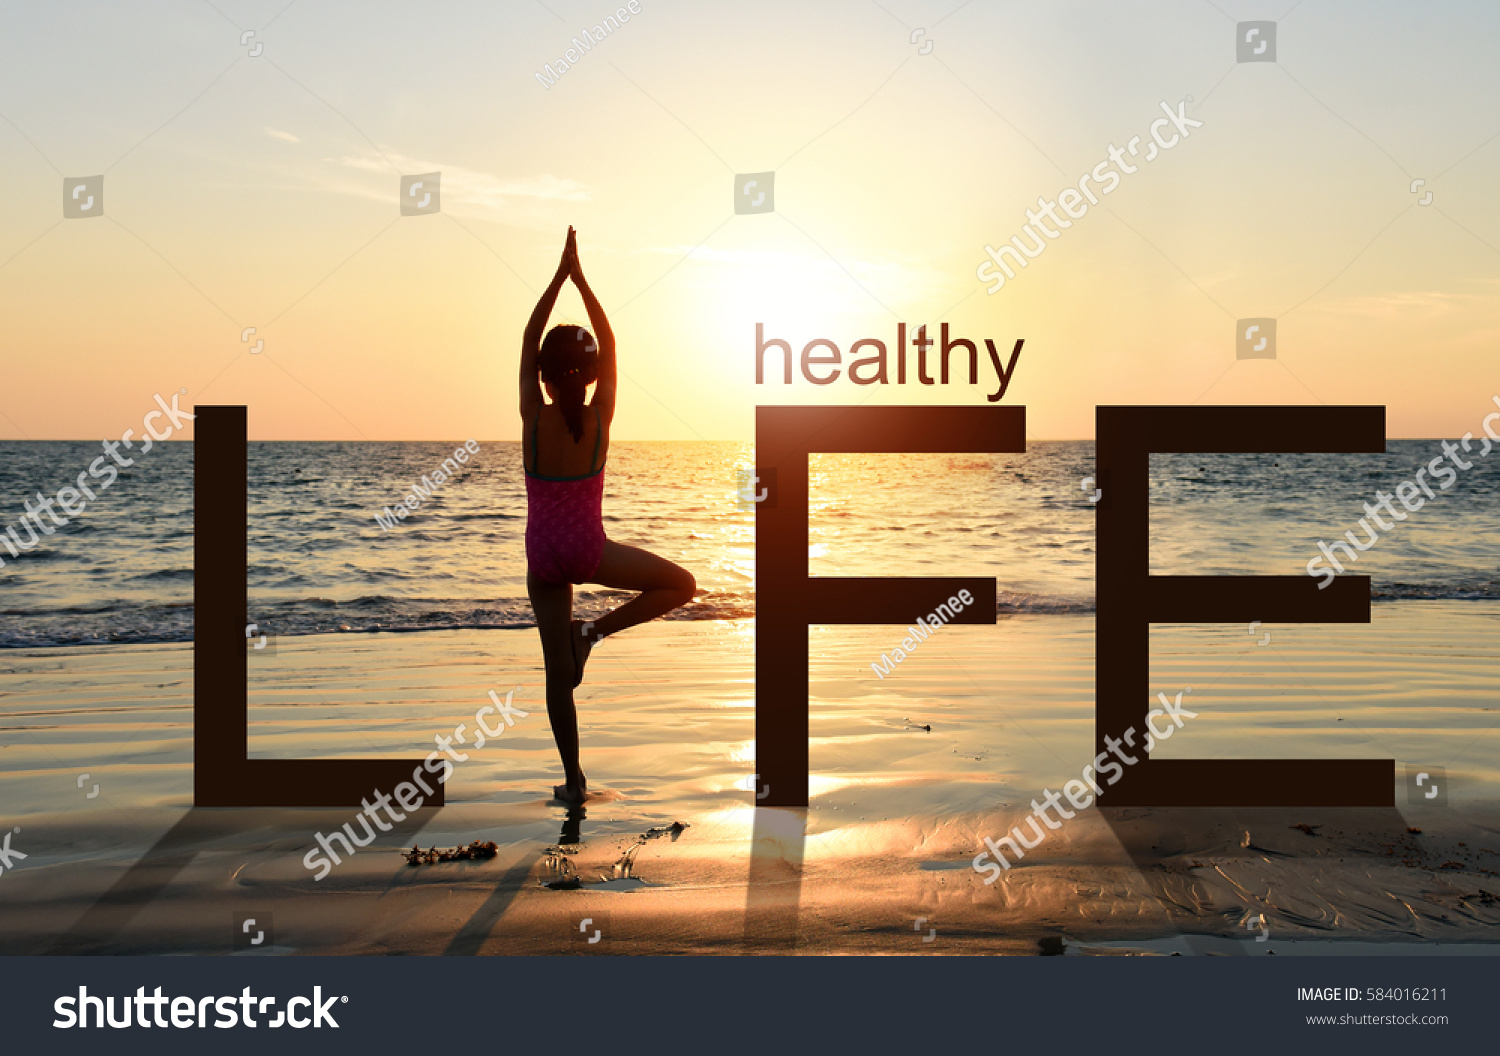  Silhouette of A girl practicing Yoga vrikshasana tree pose on tropical beach with sunset sky background, watching the sunset, standing as a part of the wording concept for healthy life.  #584016211